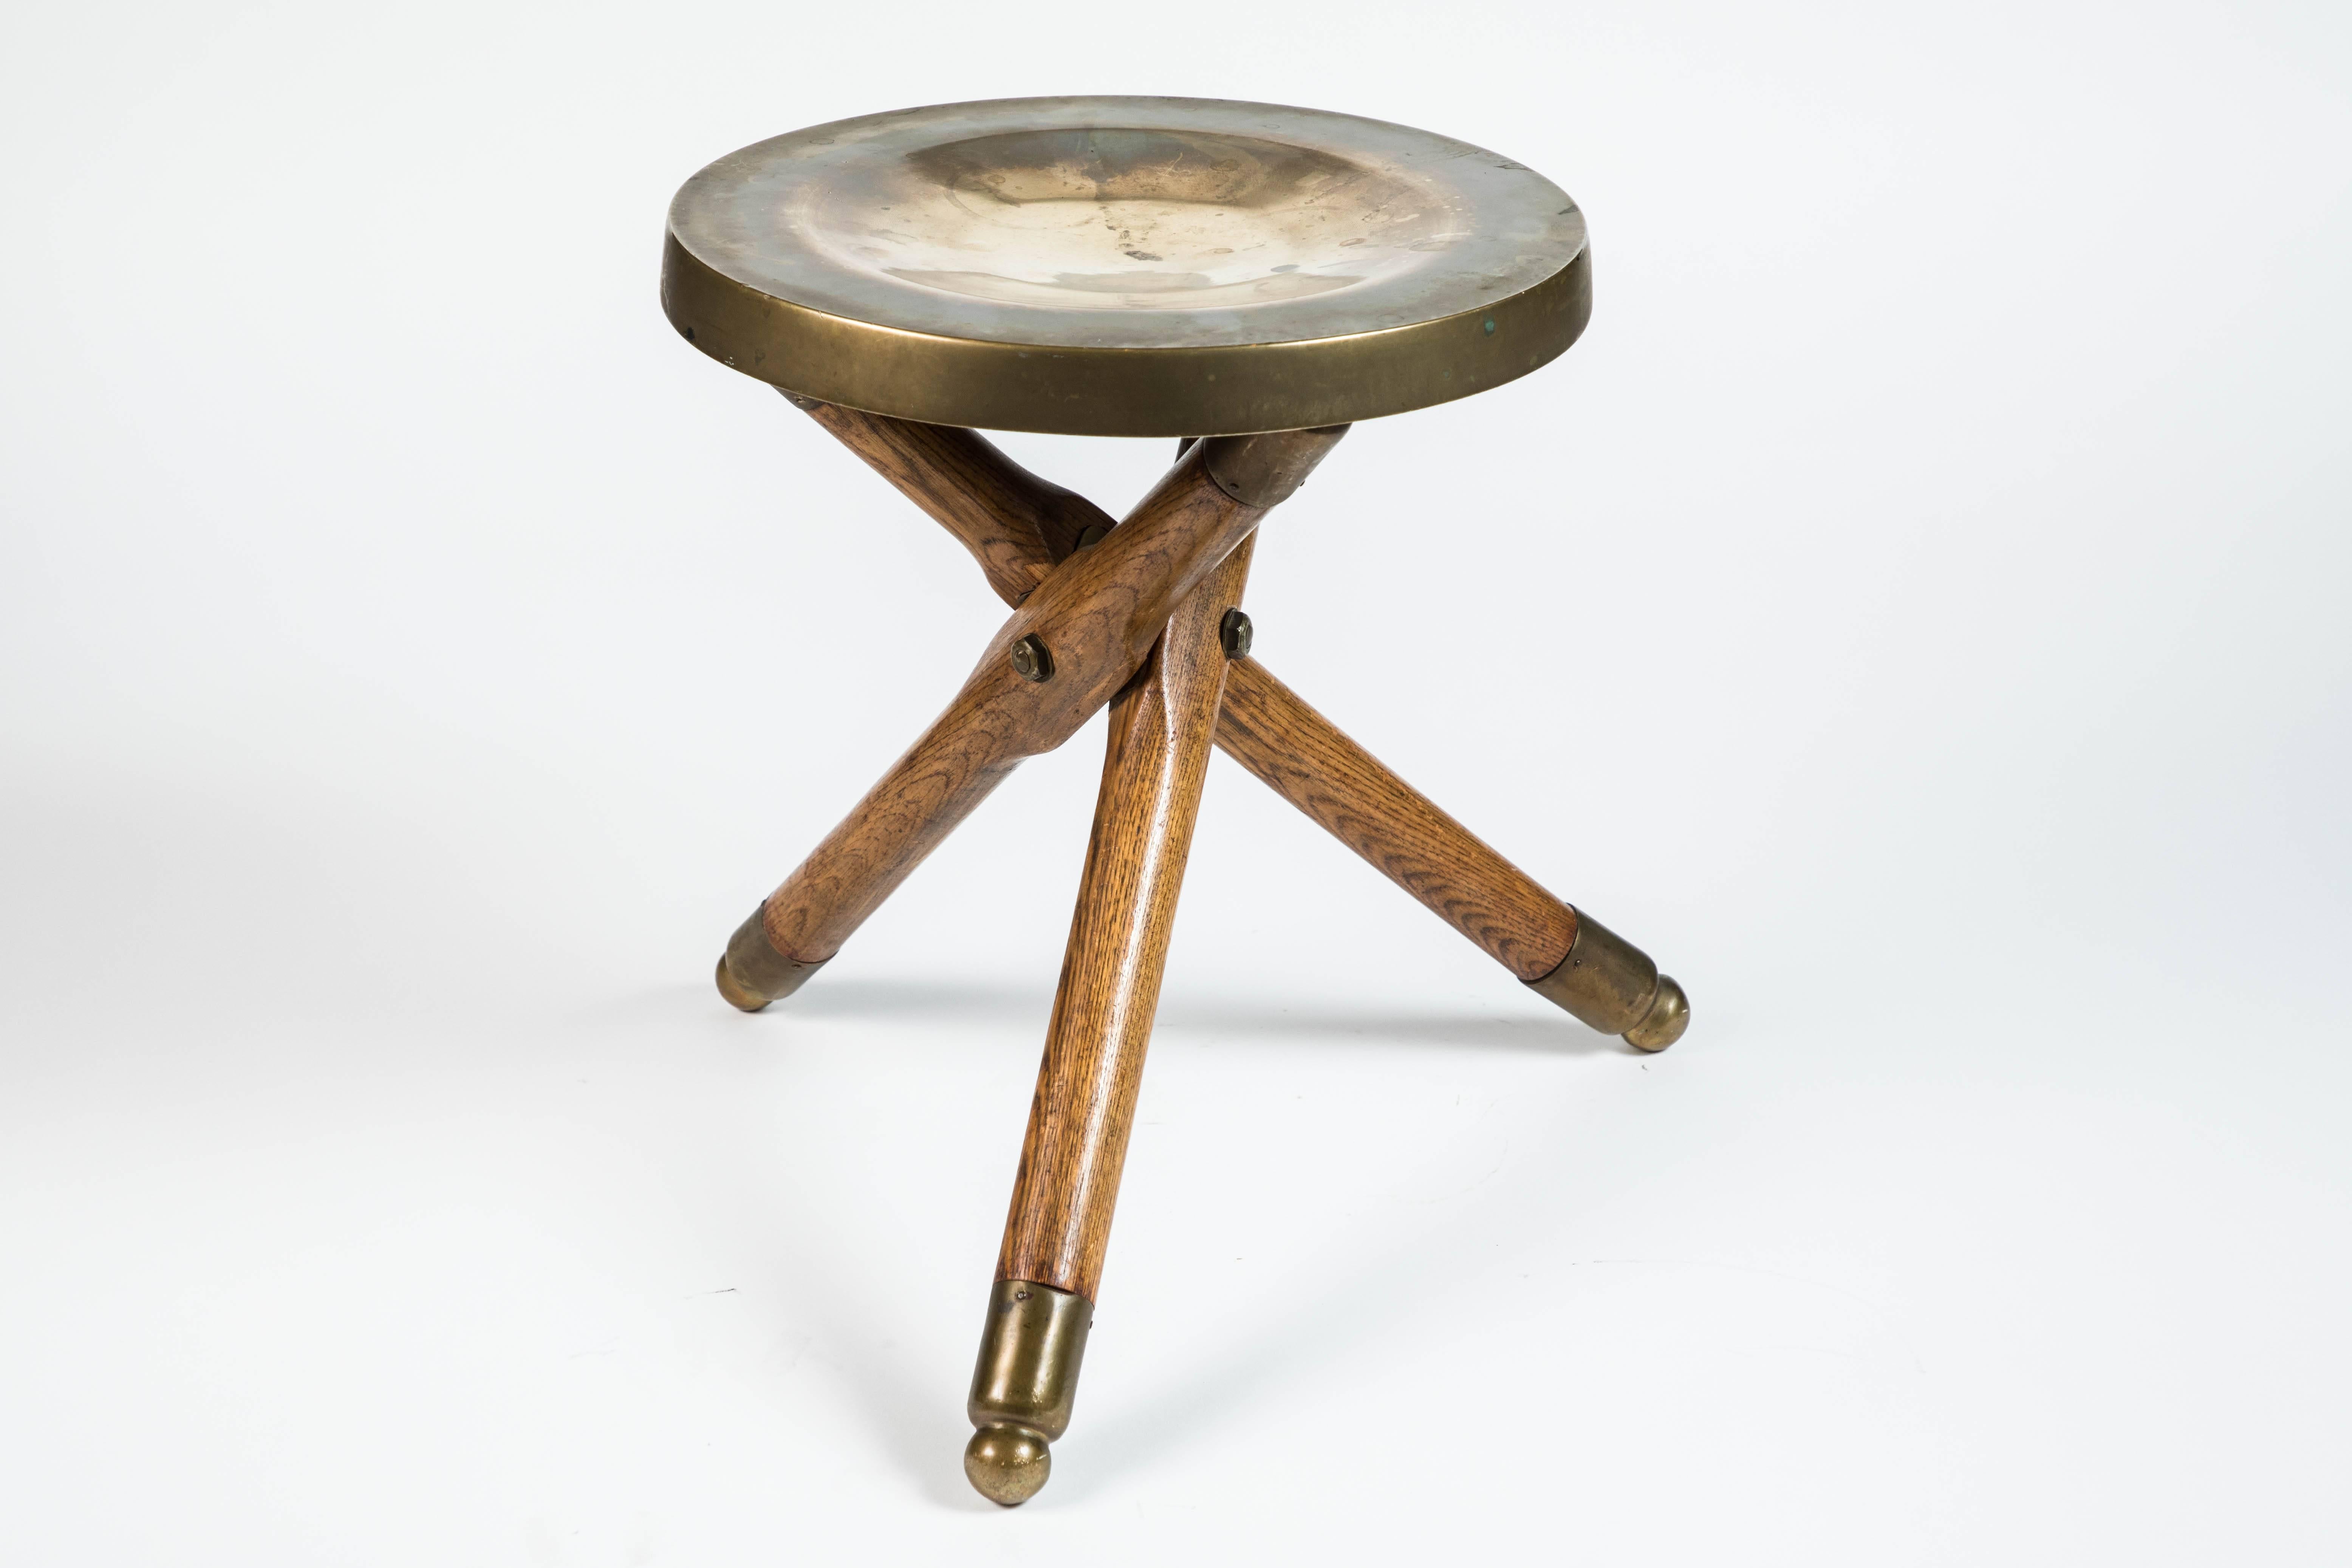 Vintage wooden tripod folding stool with brass seat and brass feet.